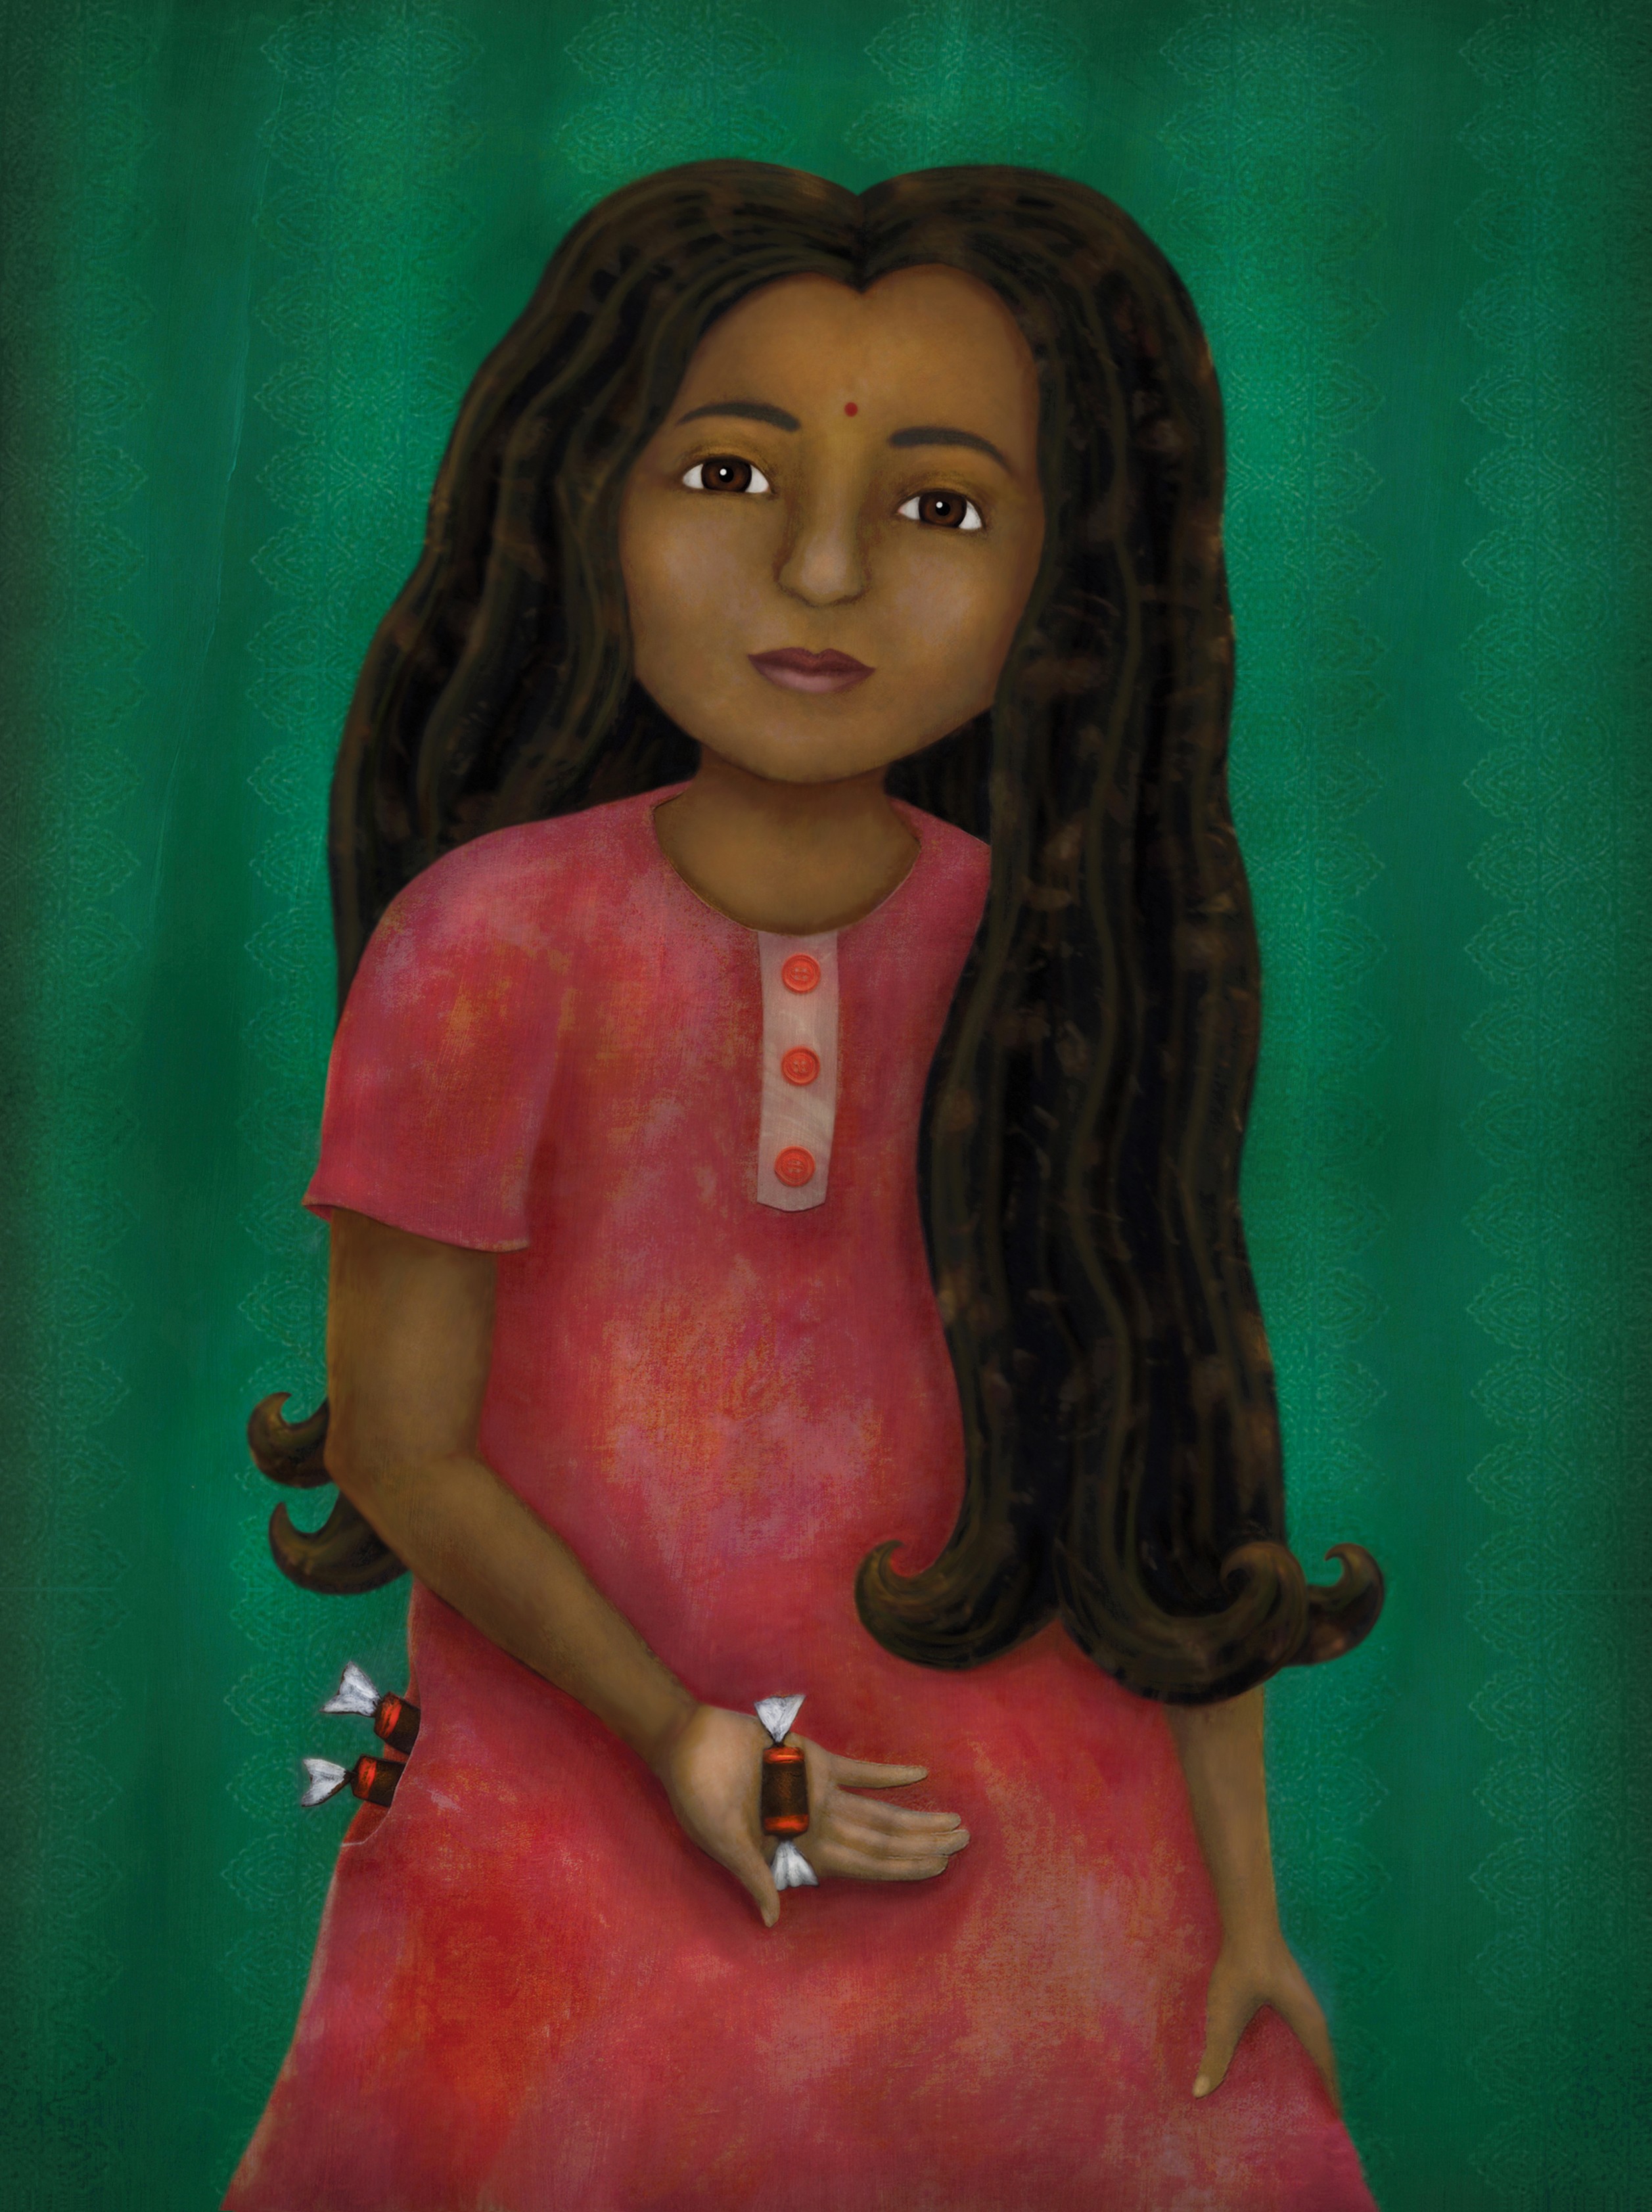 Illustration by Lisa Desimini of a young girl in a red dress in front of a green background holding a tootsie roll and has two others sticking out of her left pocket.